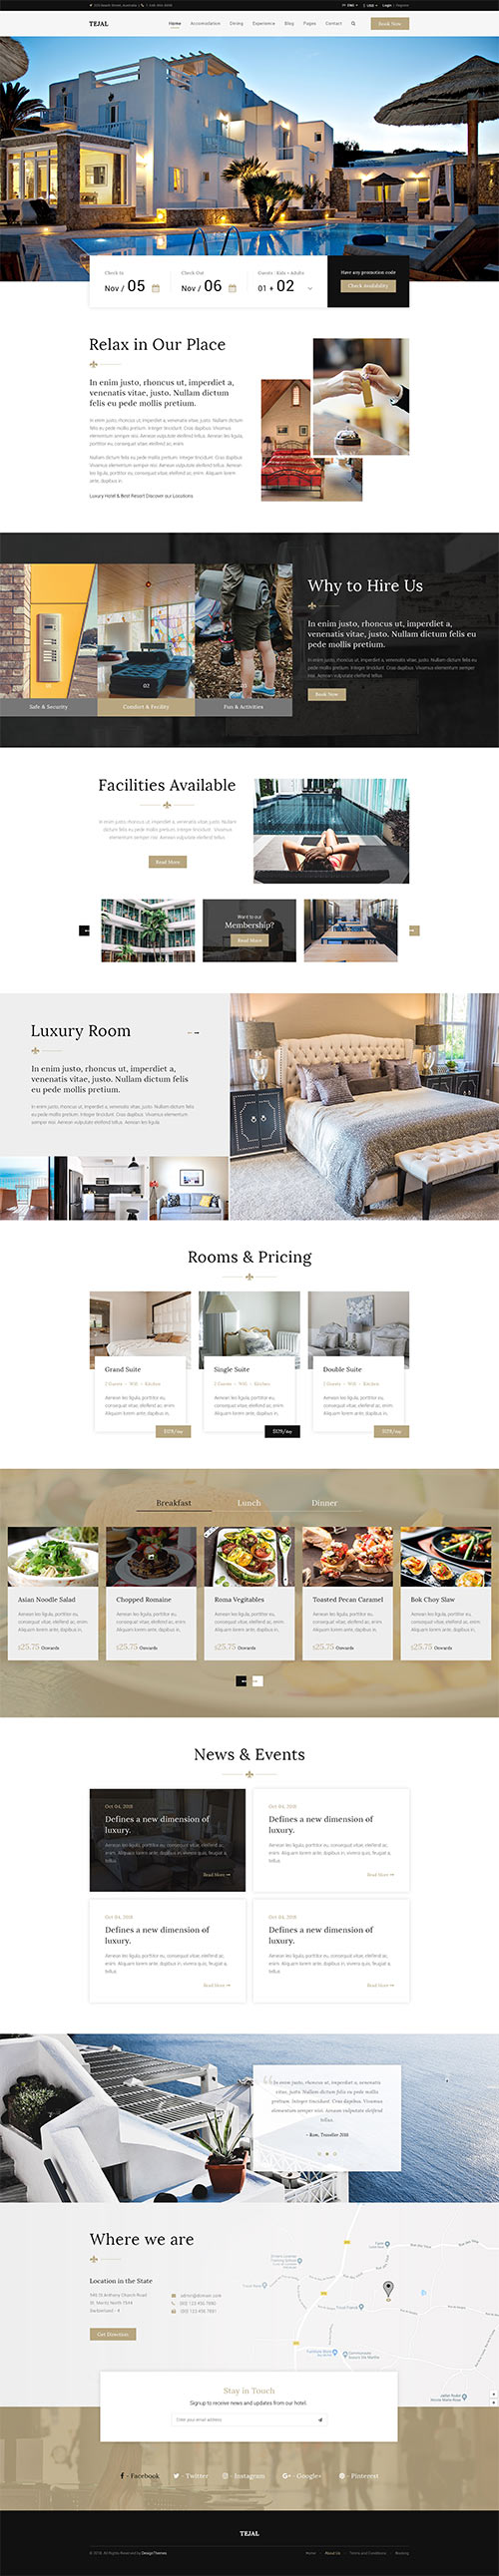 Tejal | Hotel Booking PSD Template